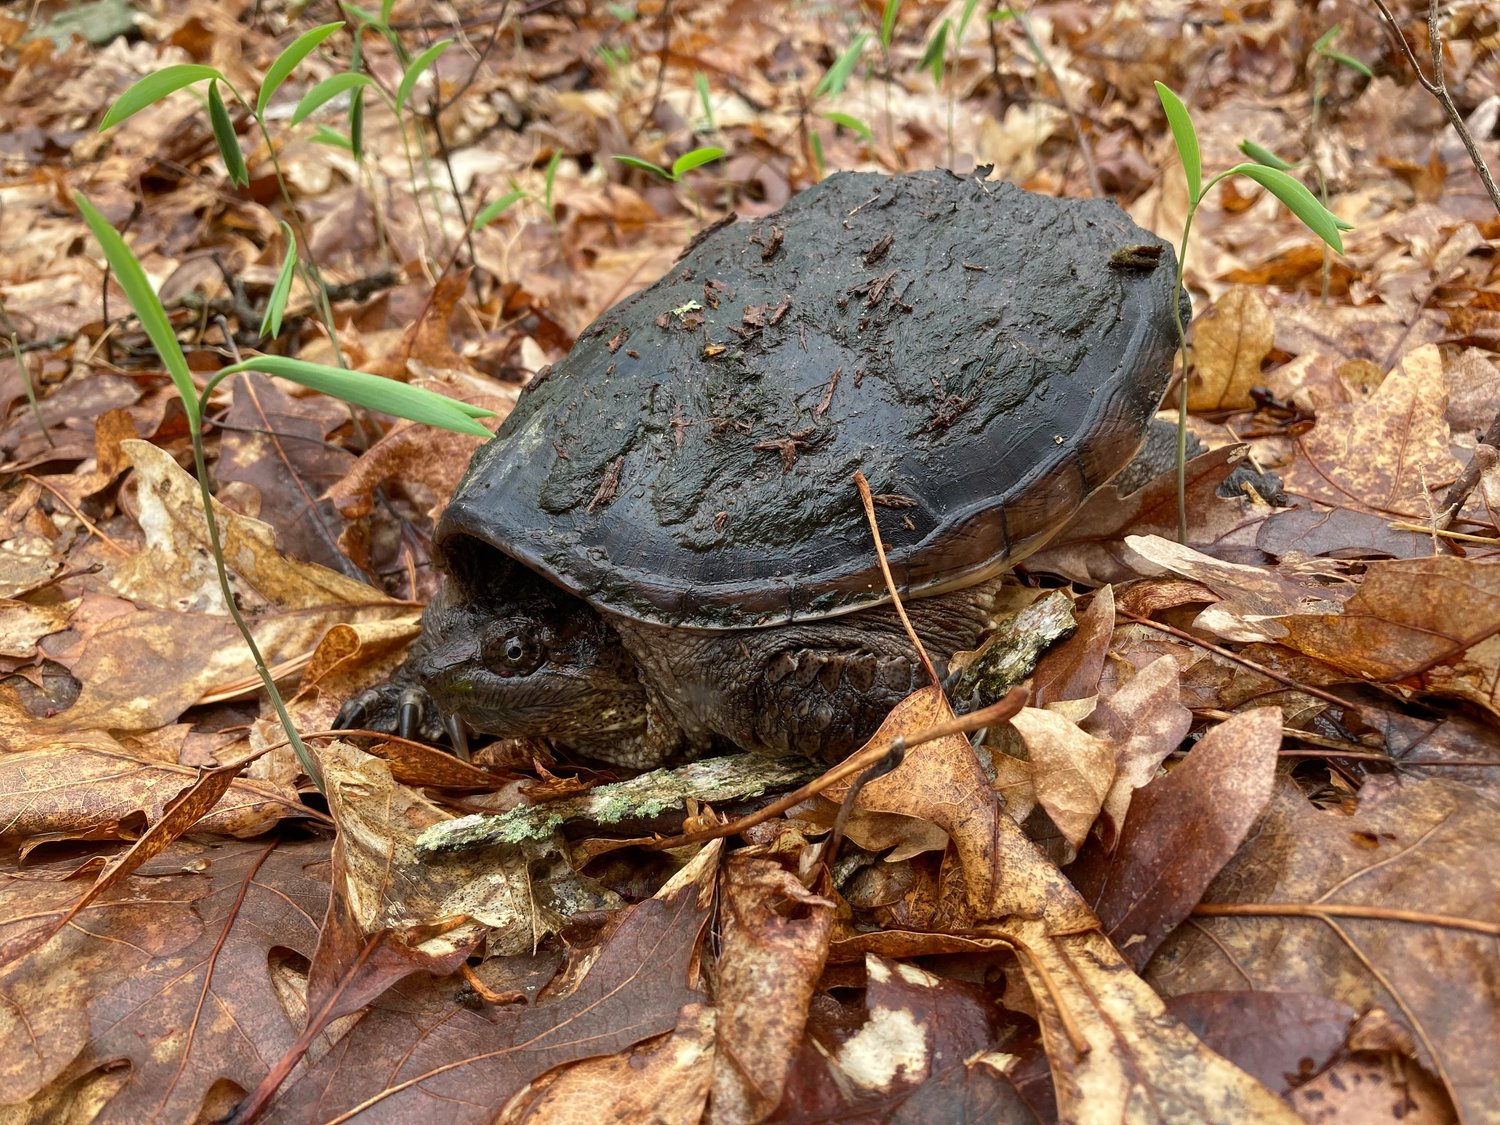 I recently encountered this young snapping turtle slowly making its way through a stretch of forest in Pike County, PA. These freshwater turtles can reach weights of up to 35 pounds as adults.